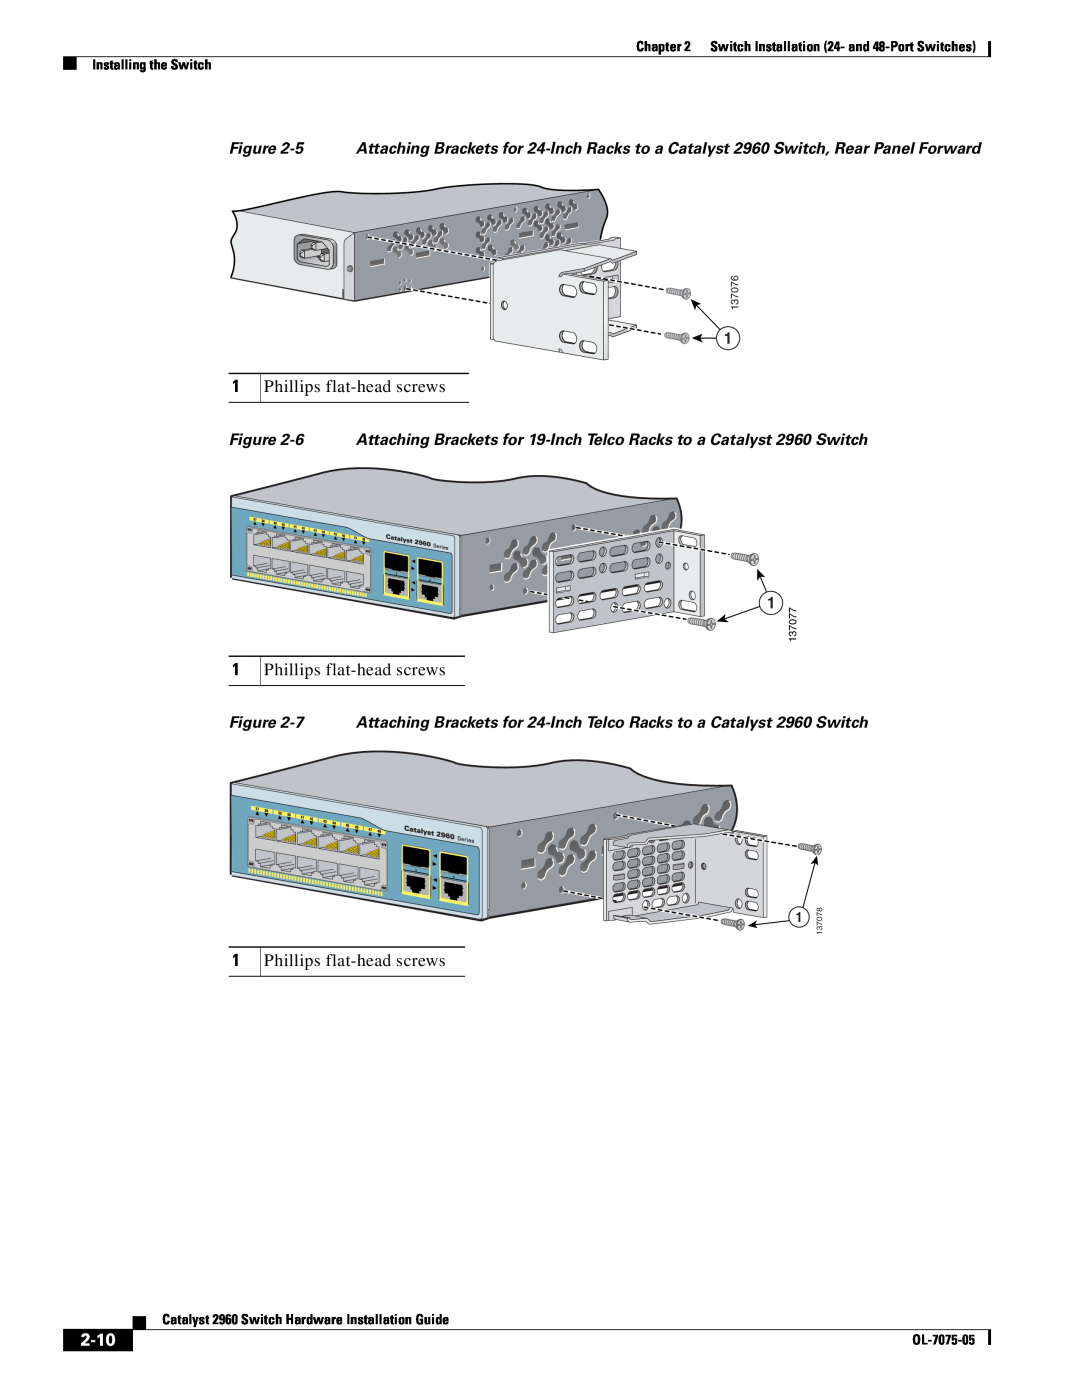 Cisco Systems specifications 2-10, 5 Attaching Brackets for 24-Inch Racks to a Catalyst 2960 Switch, Rear Panel Forward 